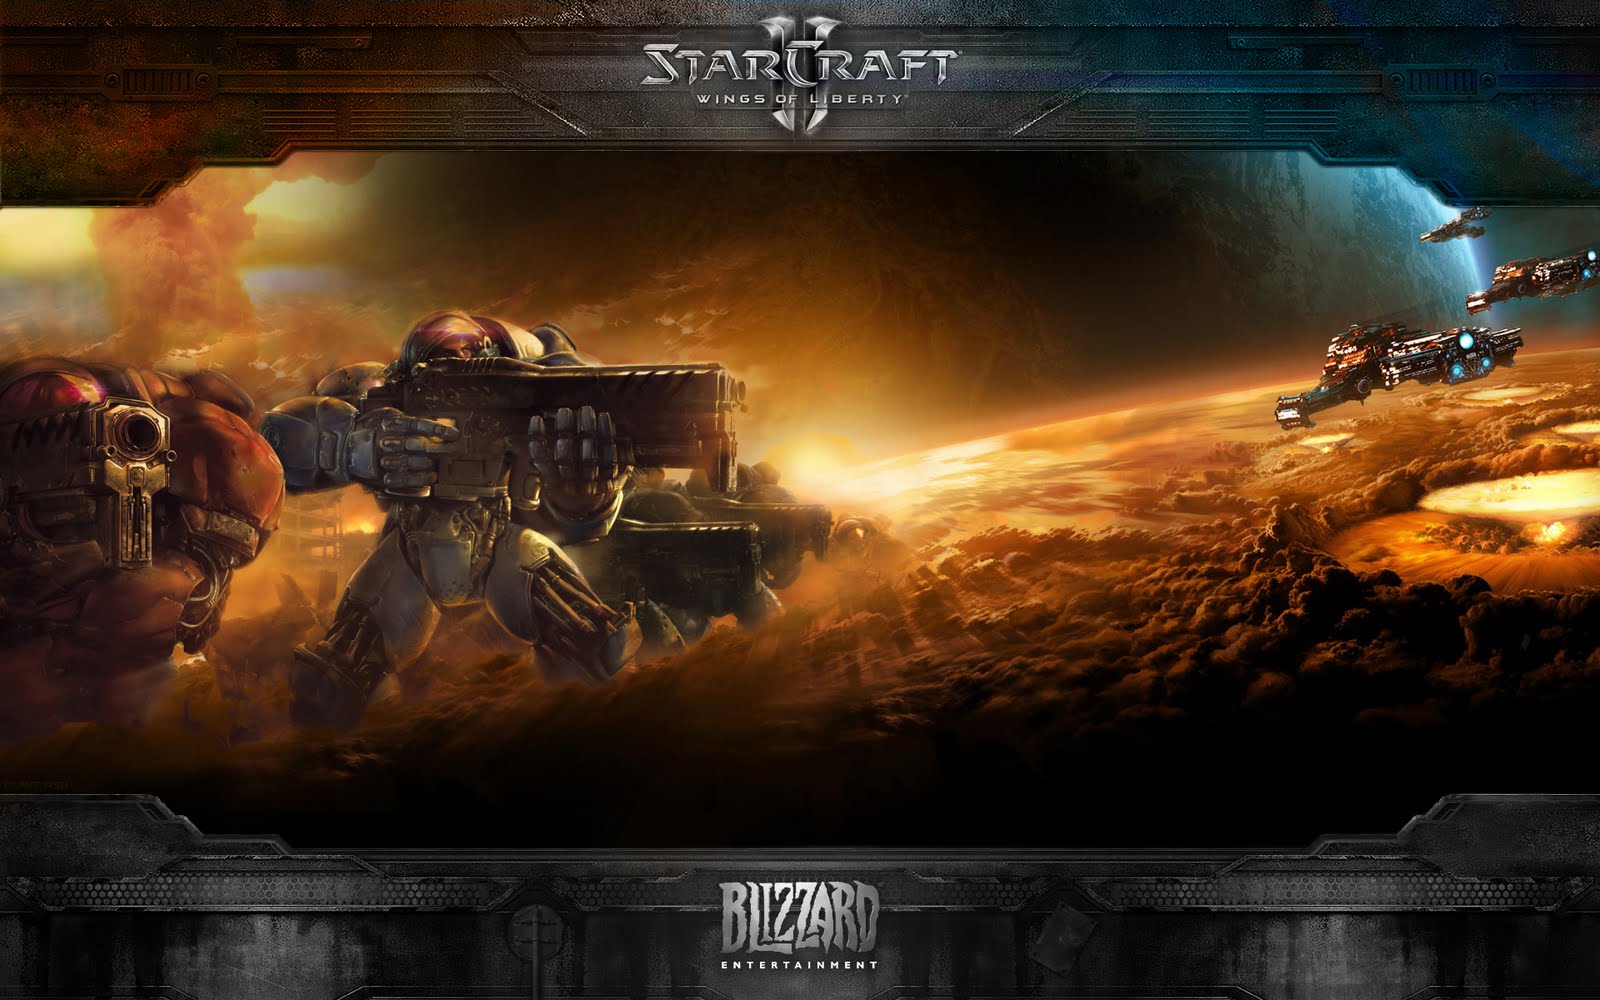 starcraft wallpaper hd,action adventure game,strategy video game,pc game,games,screenshot